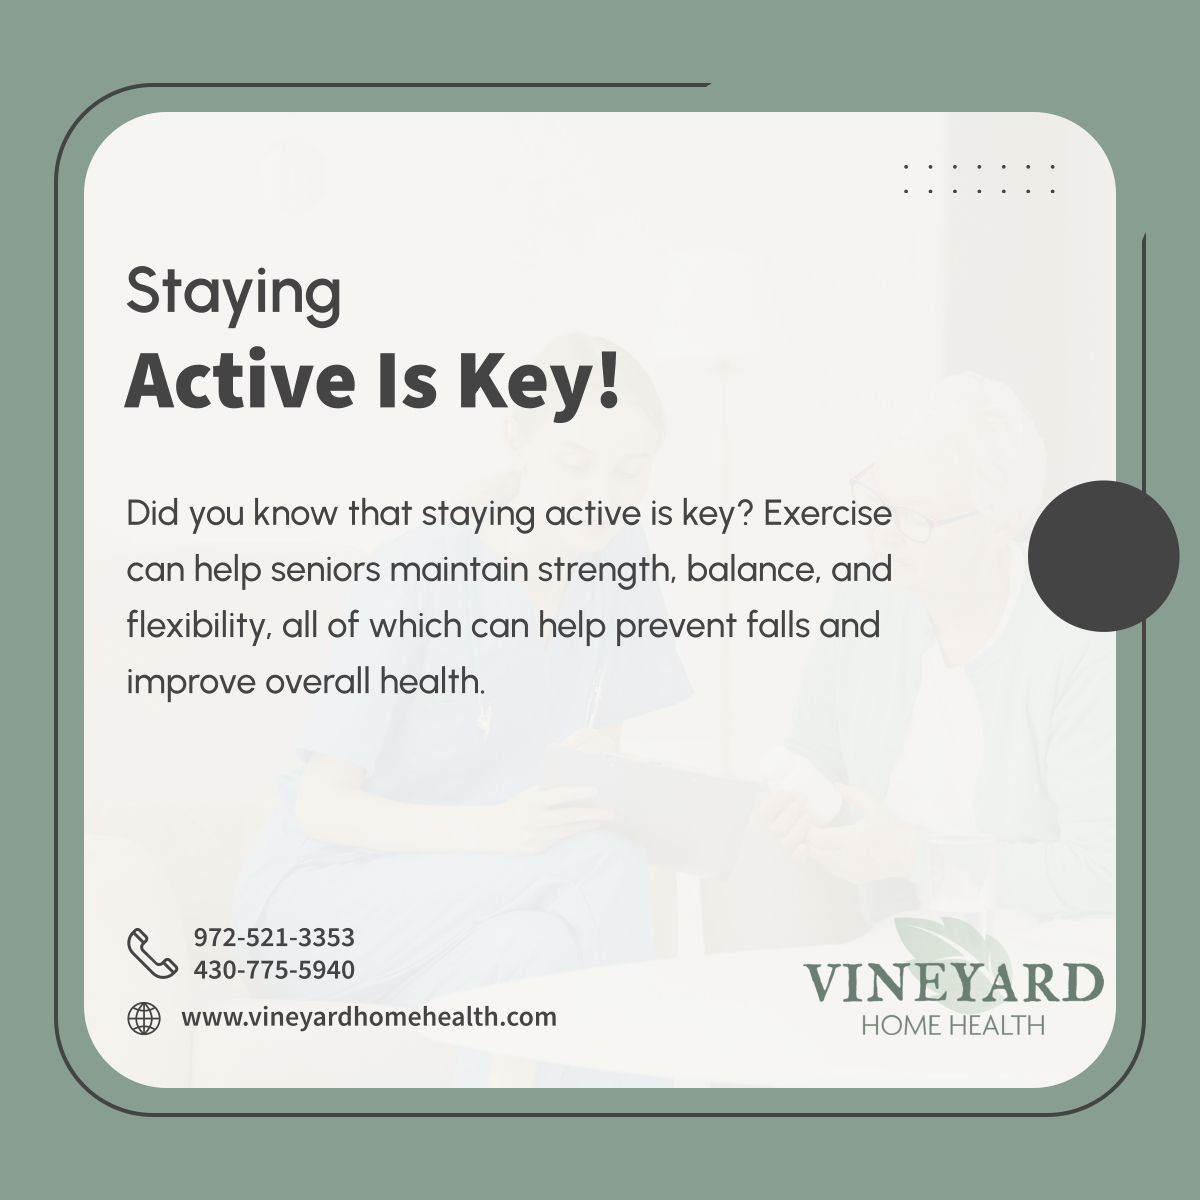 Incorporating a variety of activities, such as walking and swimming, into daily routines can provide comprehensive benefits for seniors' physical and mental health. By staying active, older adults can enjoy a more vibrant lifestyle as they age. 

#ActiveAging #SeniorFitness